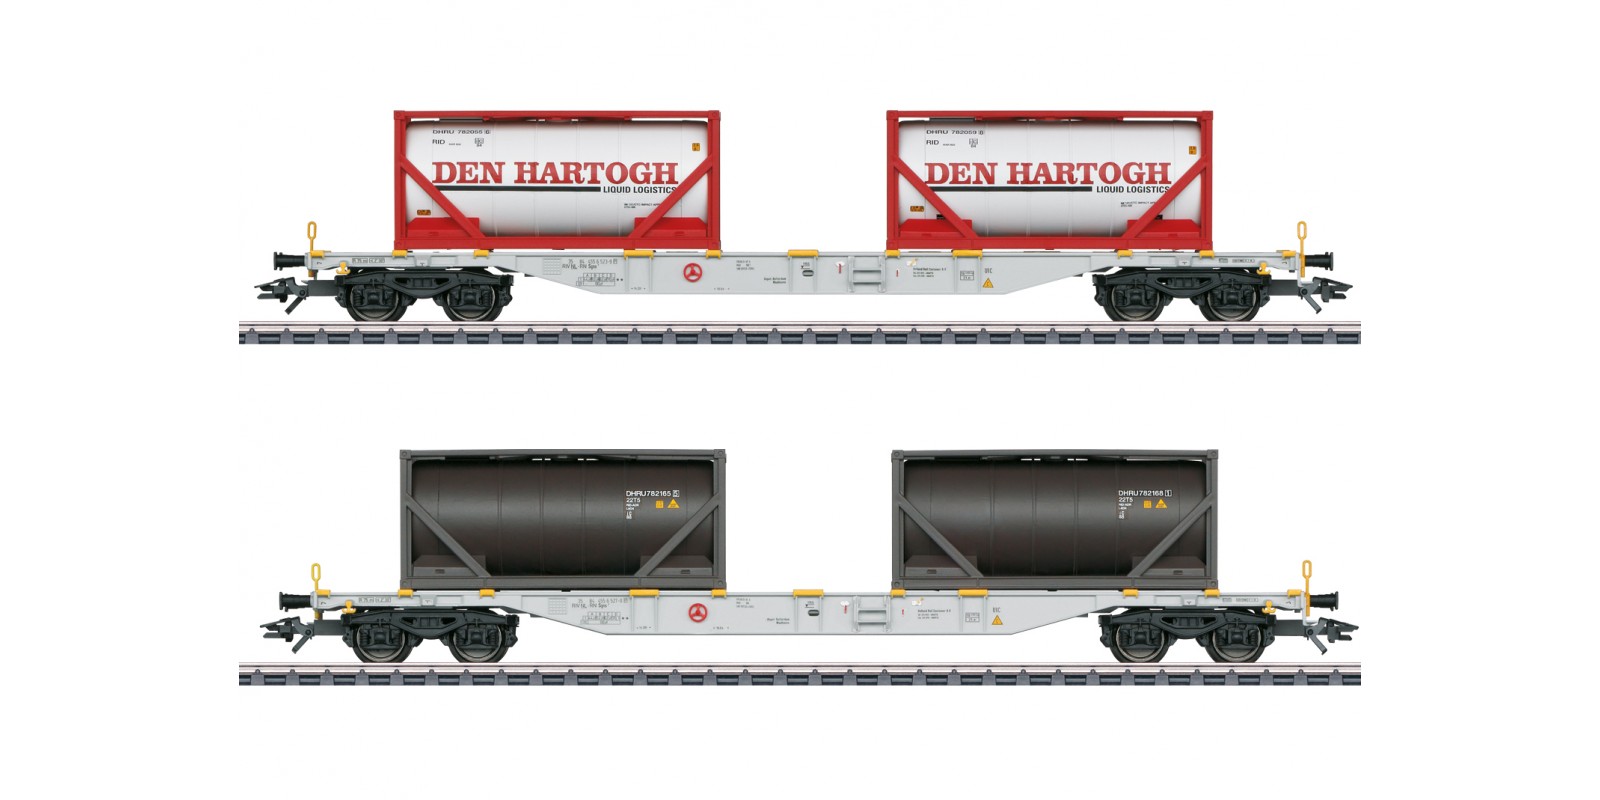 047137 Type Sgns Container Transport Car Set